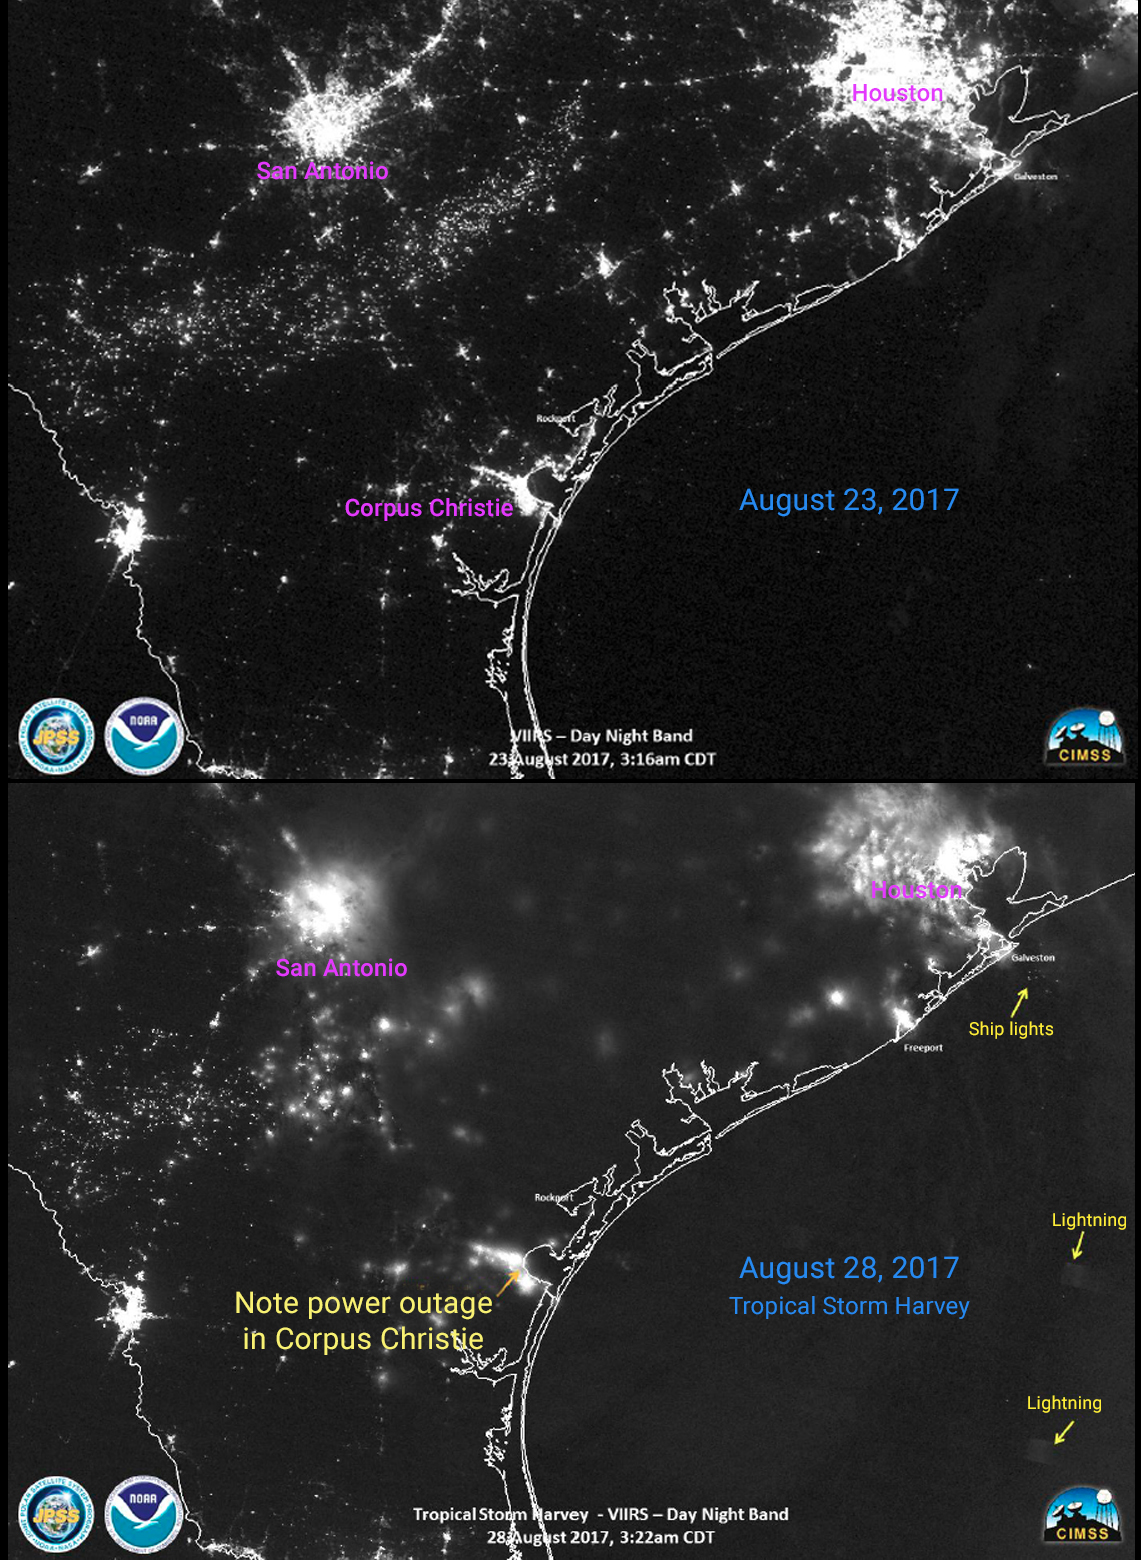 Black-and-white satellite images of the region of Texas around Houston, San Antonio and Corpus Christie. The top image shows light levels in the region prior to Hurricane Harvey. The bottom image shows light levels after the storm. Light levels have dimmed in all three cities, particularly Corpus Christie where there was a power outage.